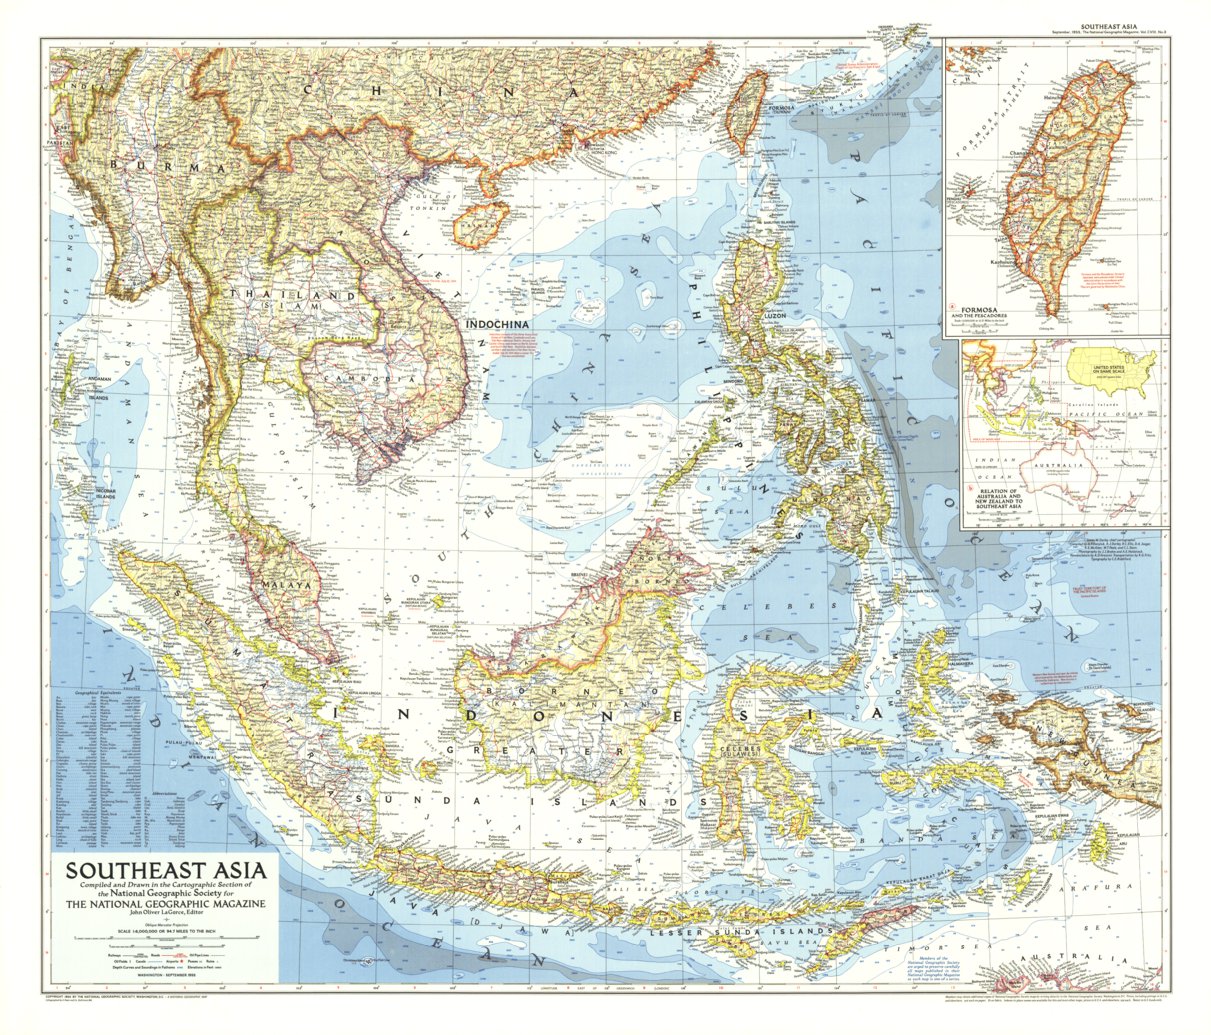 Southeast Asia 1955 Map by National Geographic | Avenza Maps